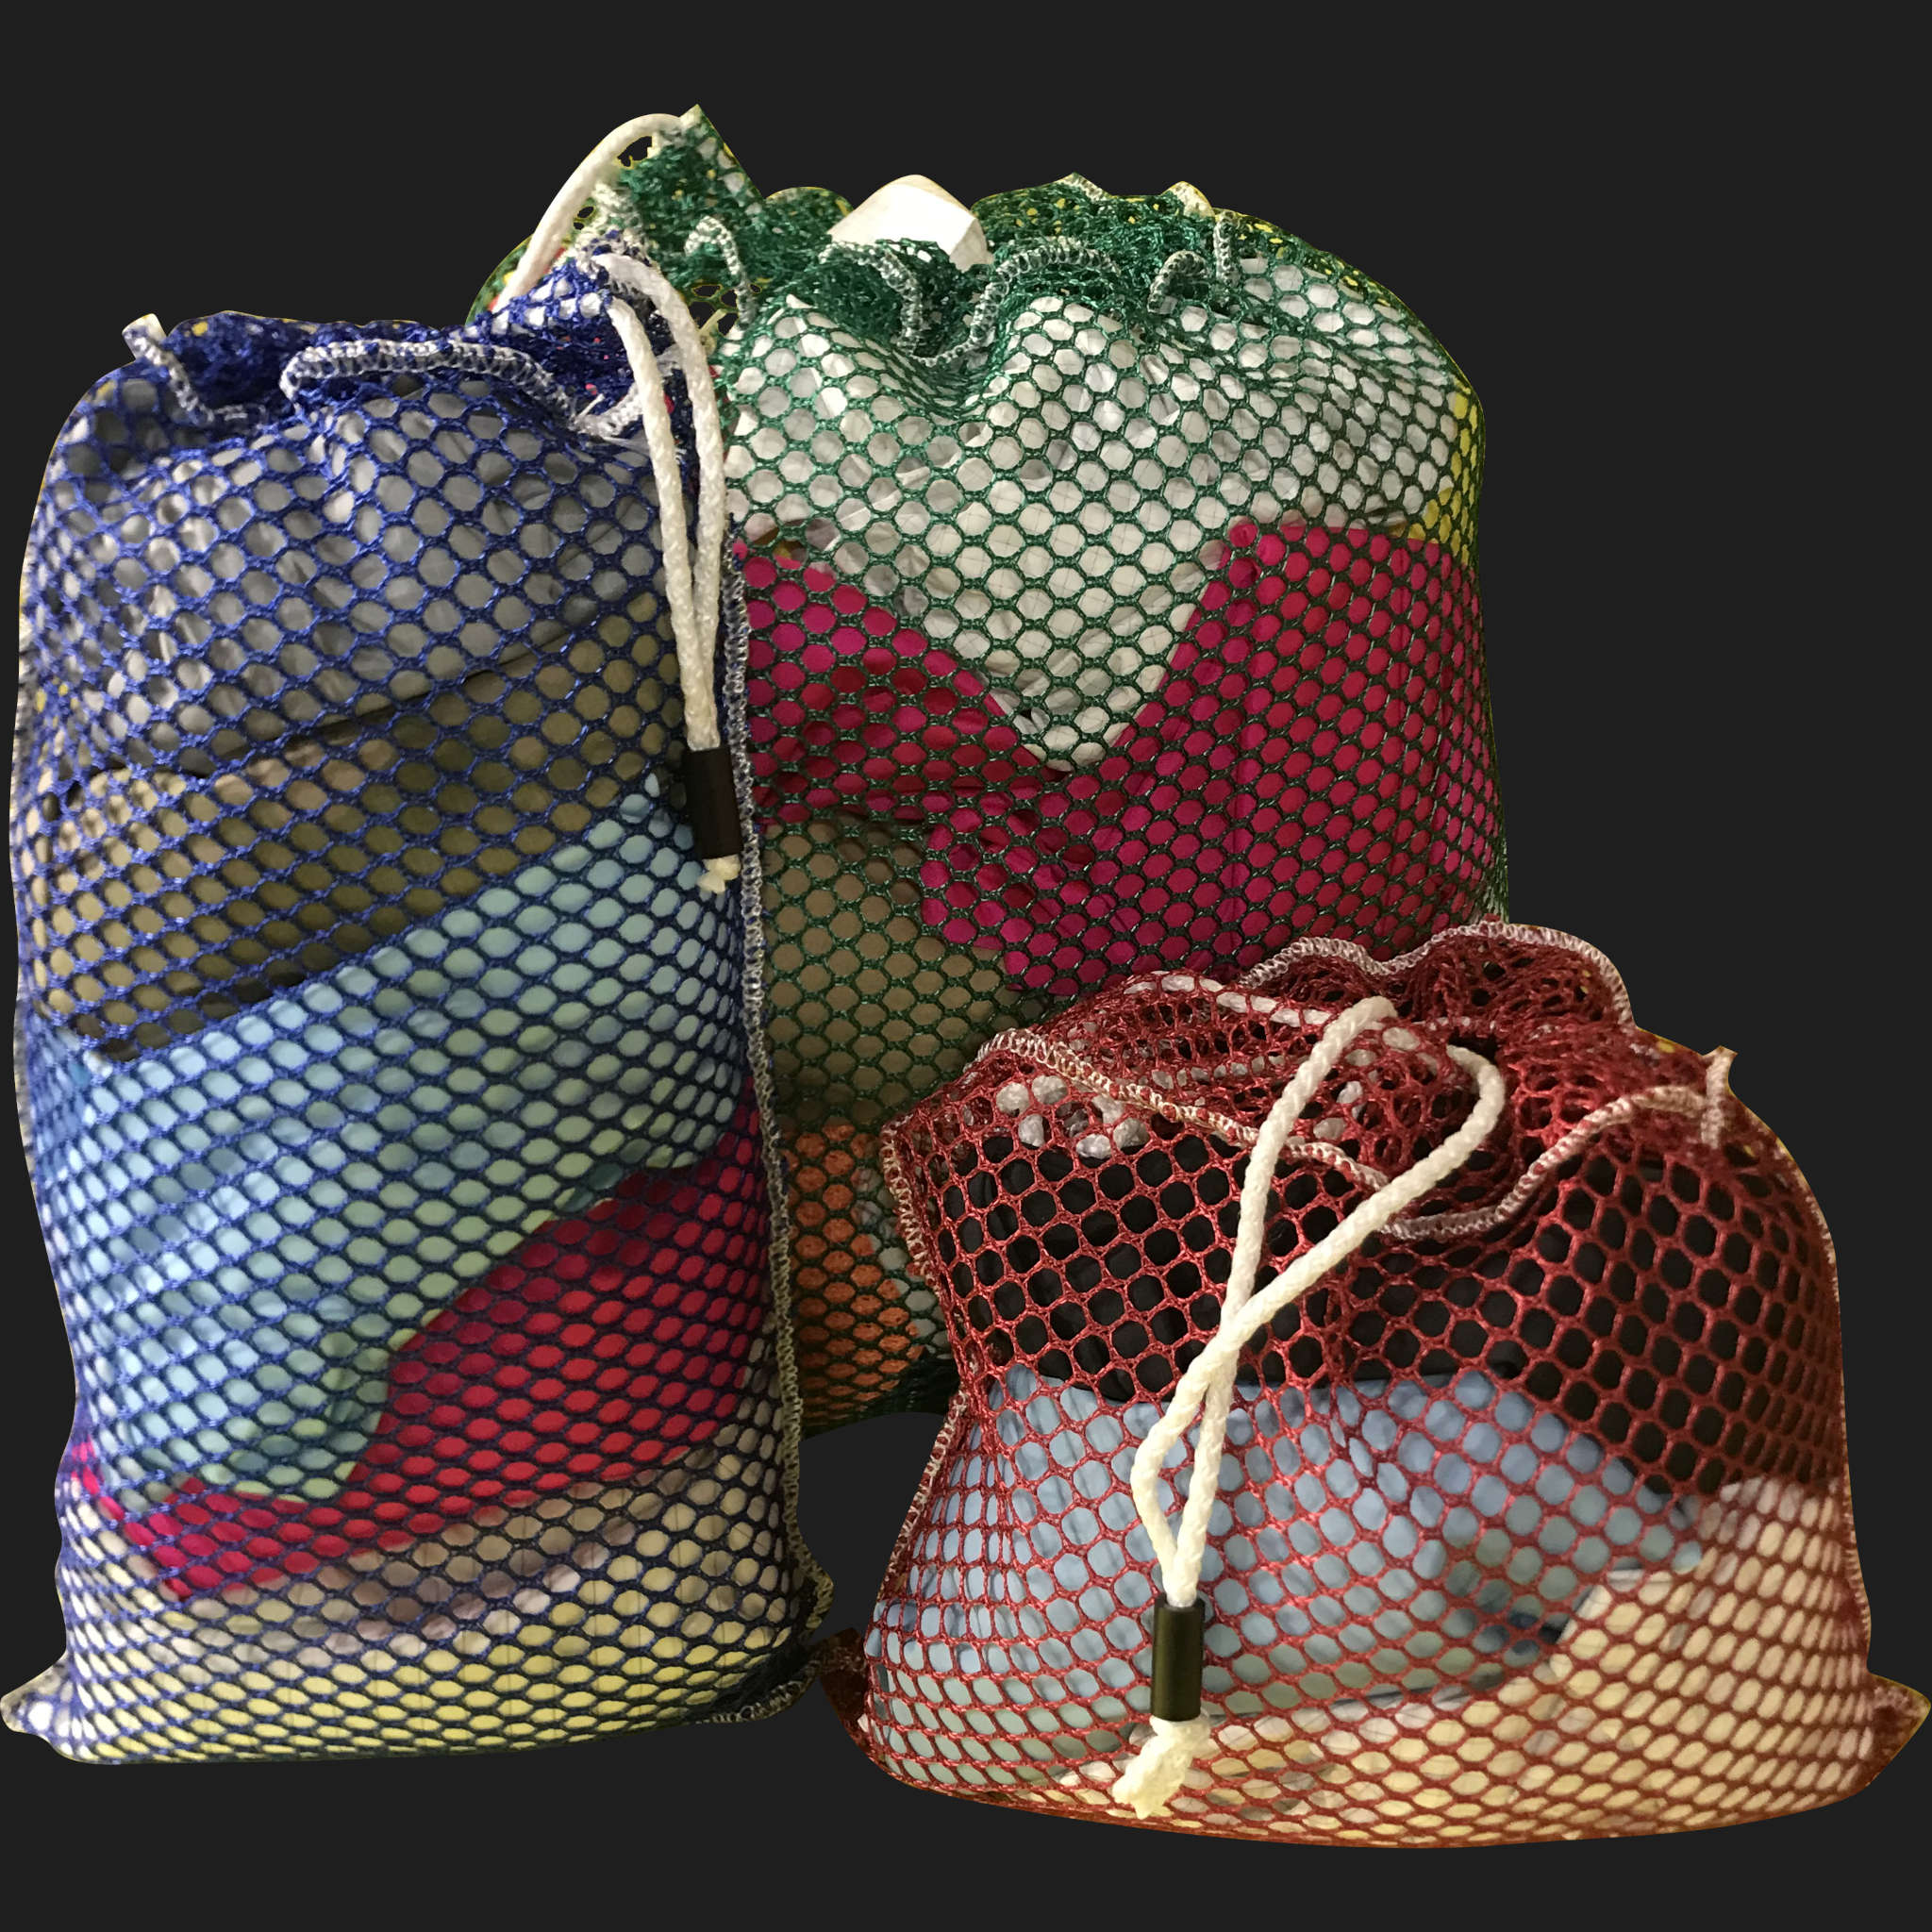 46" x 74" Customized Mesh-Net-Laundry Bags Heavy Duty with Cord and barrellock closure